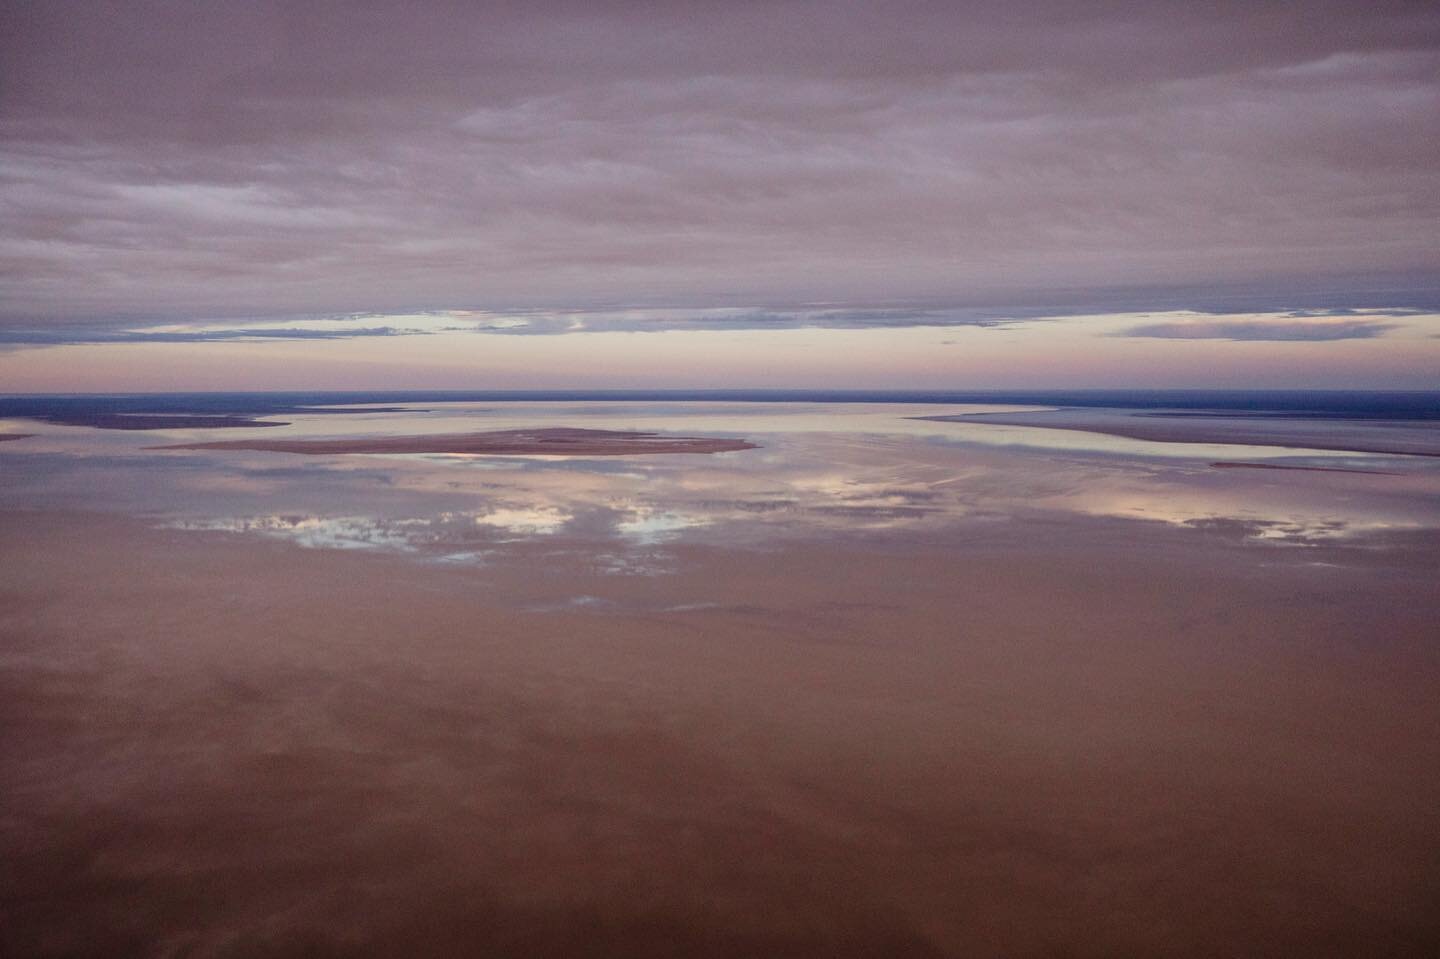 The changing colours of Kati Thanda - Lake Eyre never get old! Just ask our pilot James, who has seen them six time so far this year! What a way to see them&mdash;we really do love to fly. 

#lakeeyre #lakeeyrebasin #lakeeyrefloods #southaustralia #w